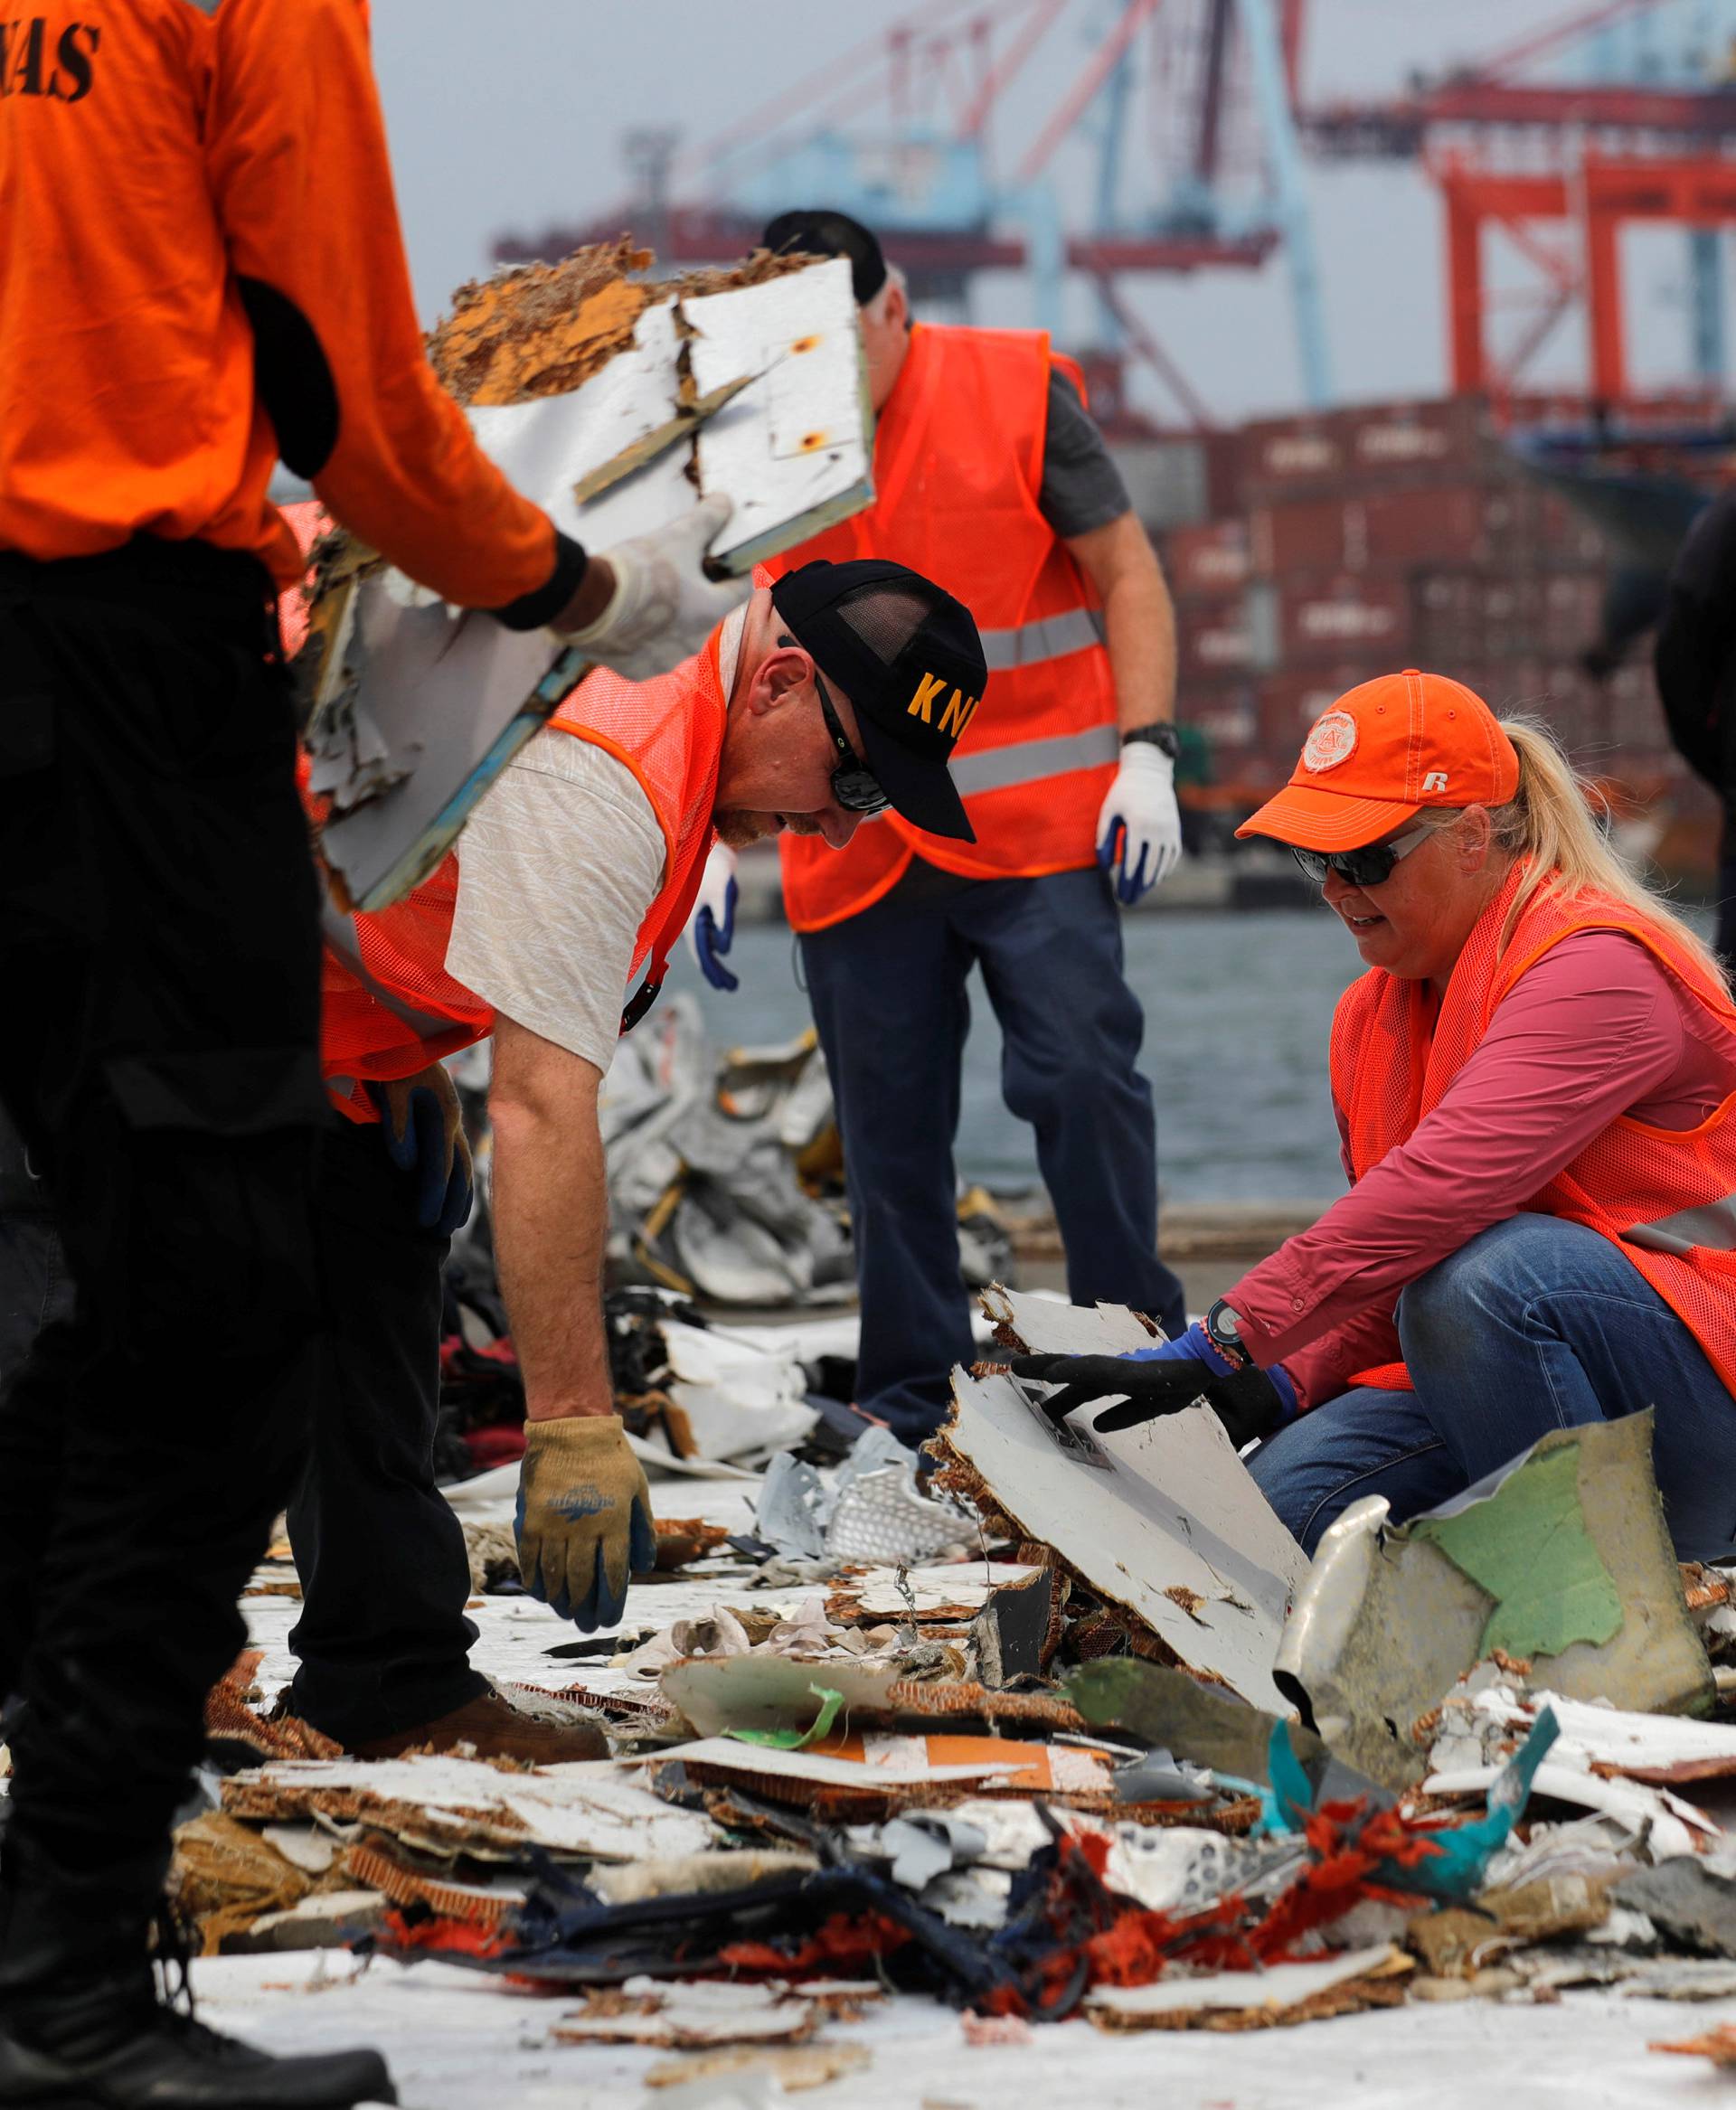 Personnel from National Transportation Safety Board examine debris from Lion Air flight JT610 at Tanjung Priok port in Jakarta